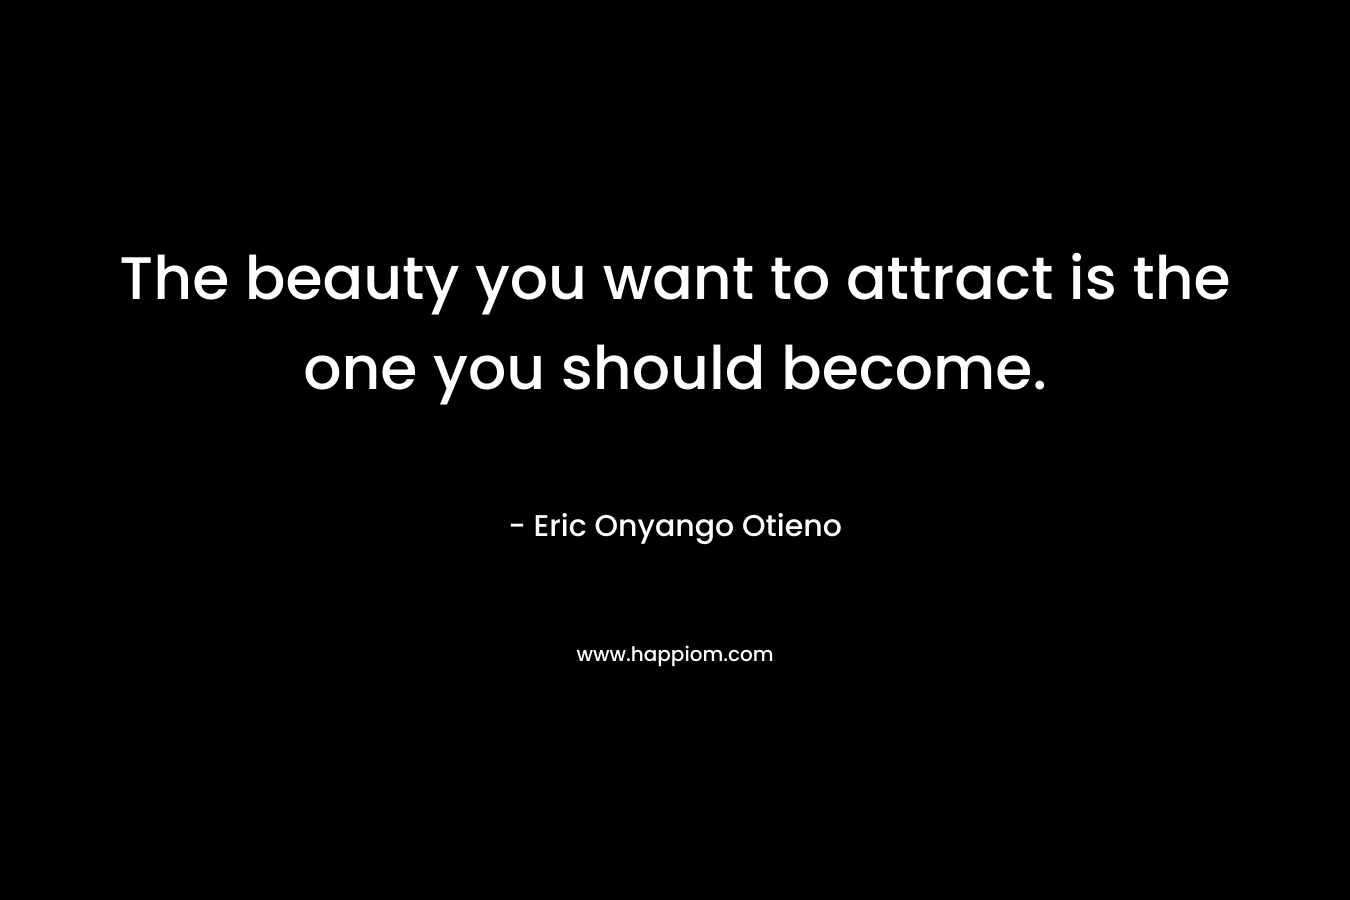 The beauty you want to attract is the one you should become. – Eric Onyango Otieno